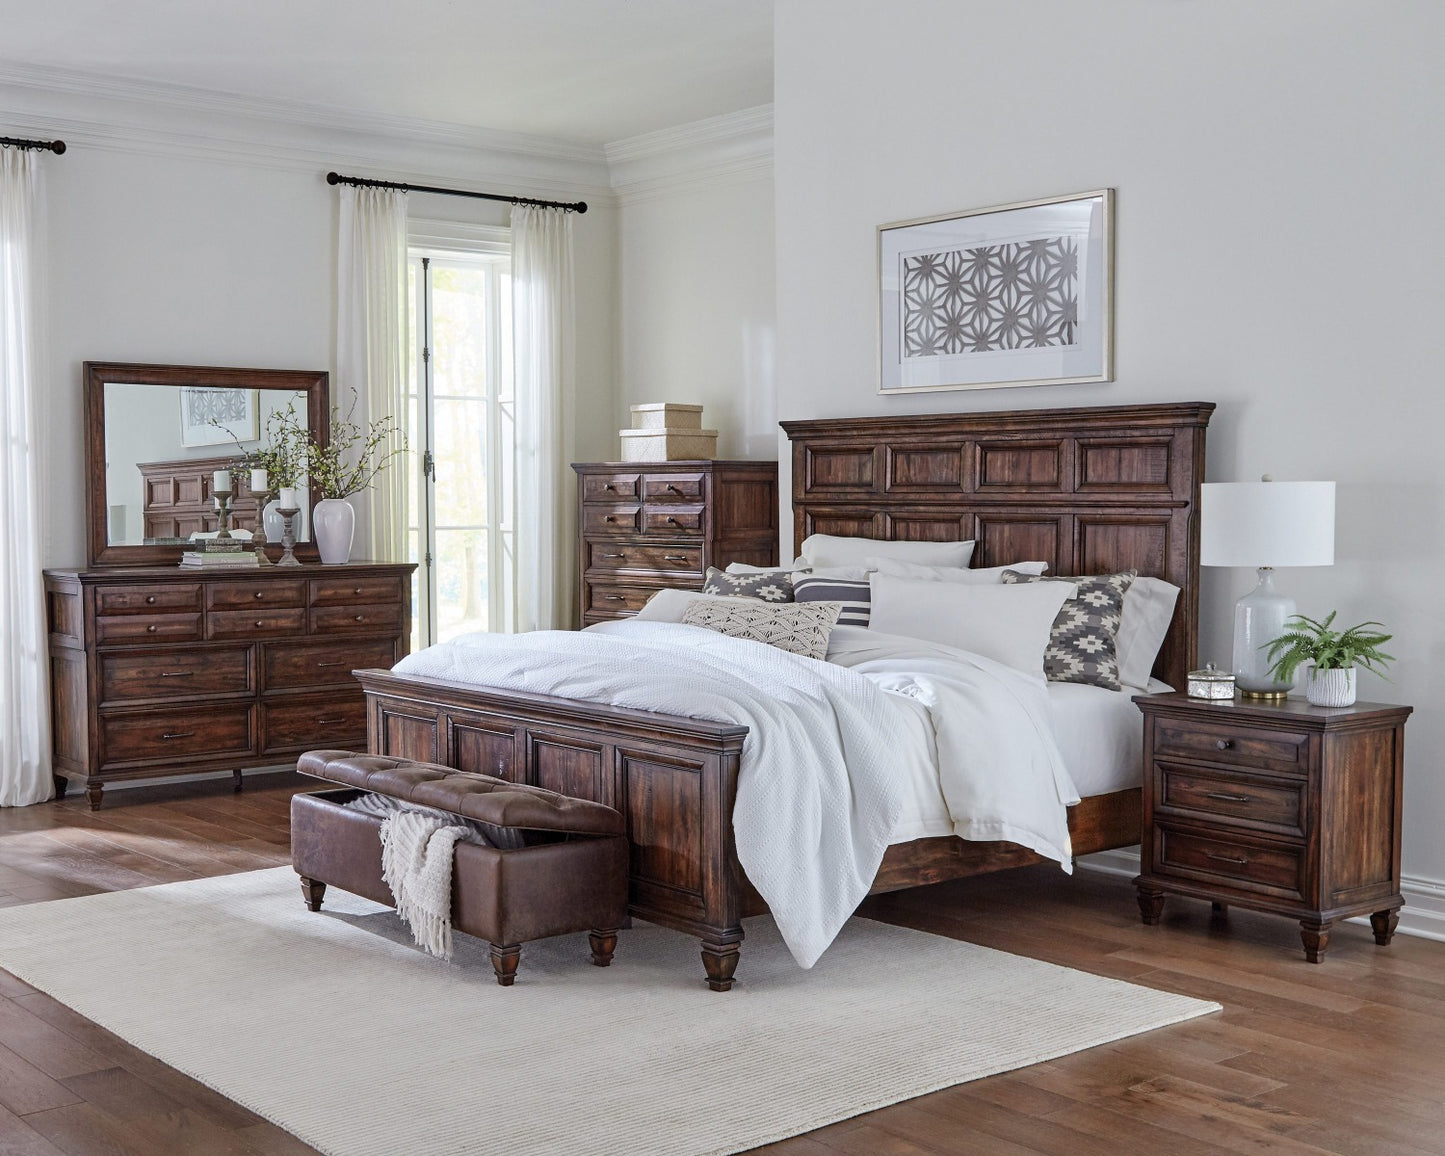 Avenue 4 Pc Bedroom Set by Coaster - Weathered Brown or Grey